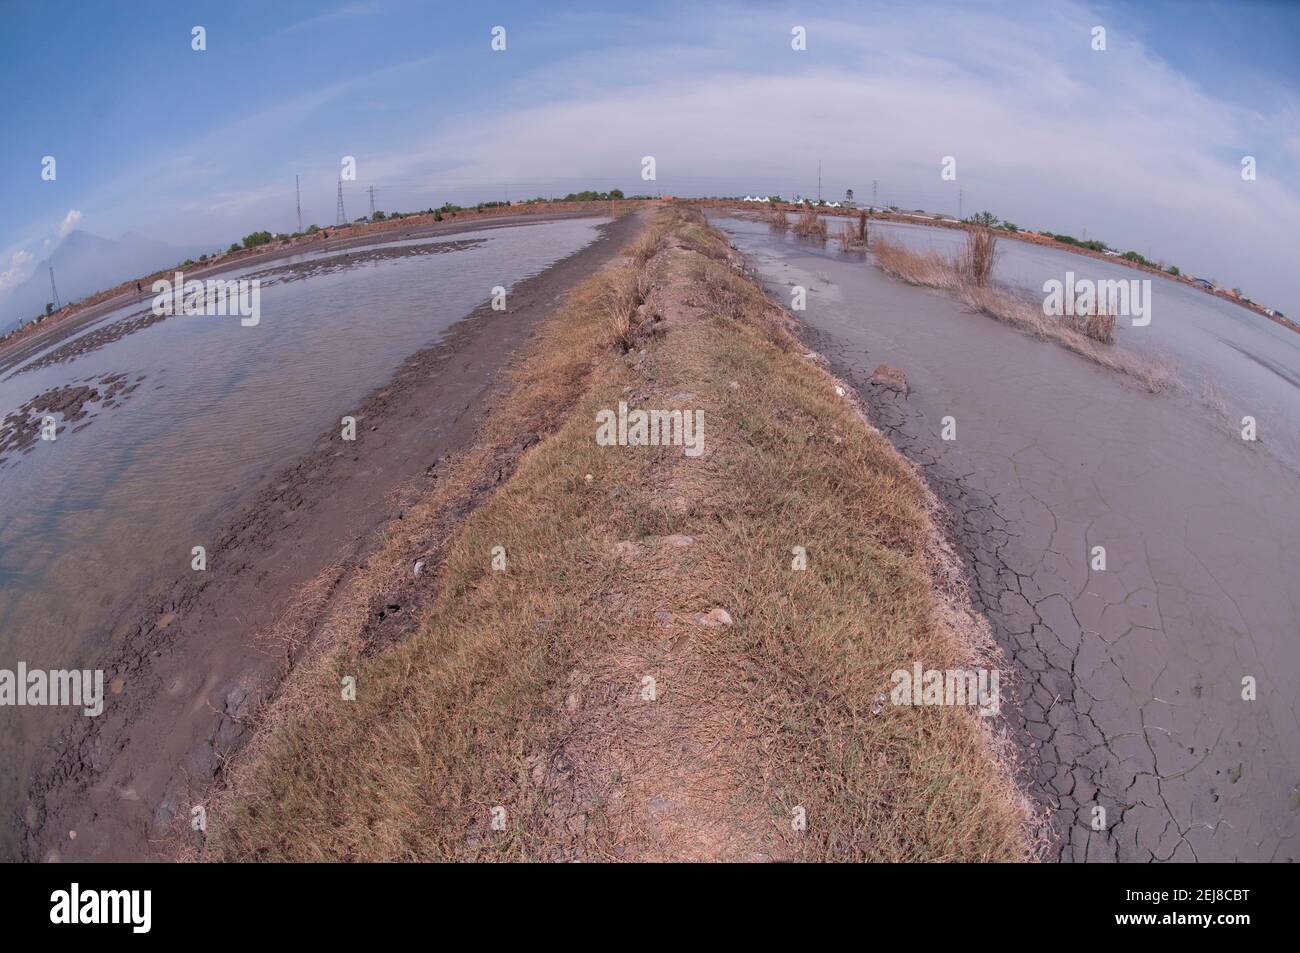 Mud and dike through mud lake environmental disaster which developed after drilling incident, Porong Sidoarjo, near Surabaya, East Java, Indonesia Stock Photo